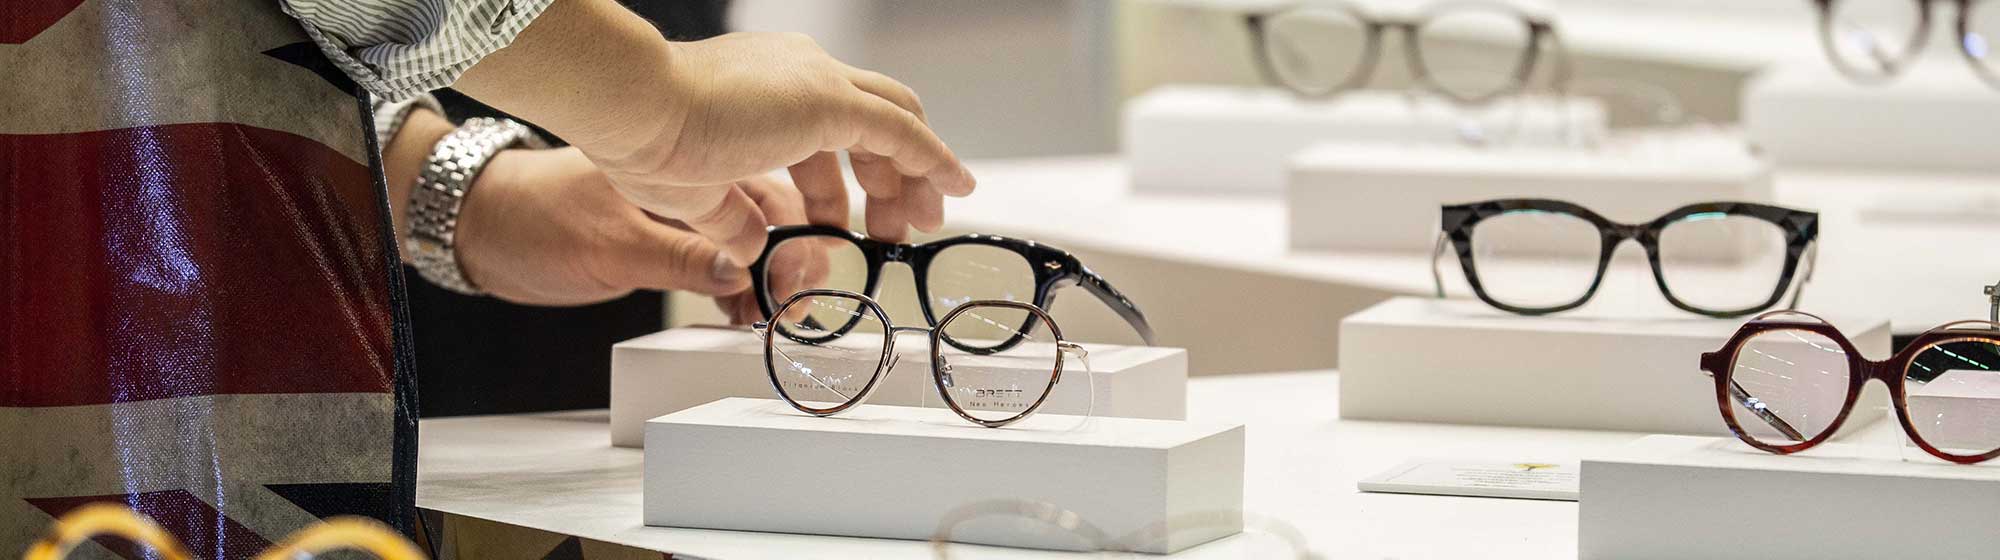 Visitors taking glasses from a table